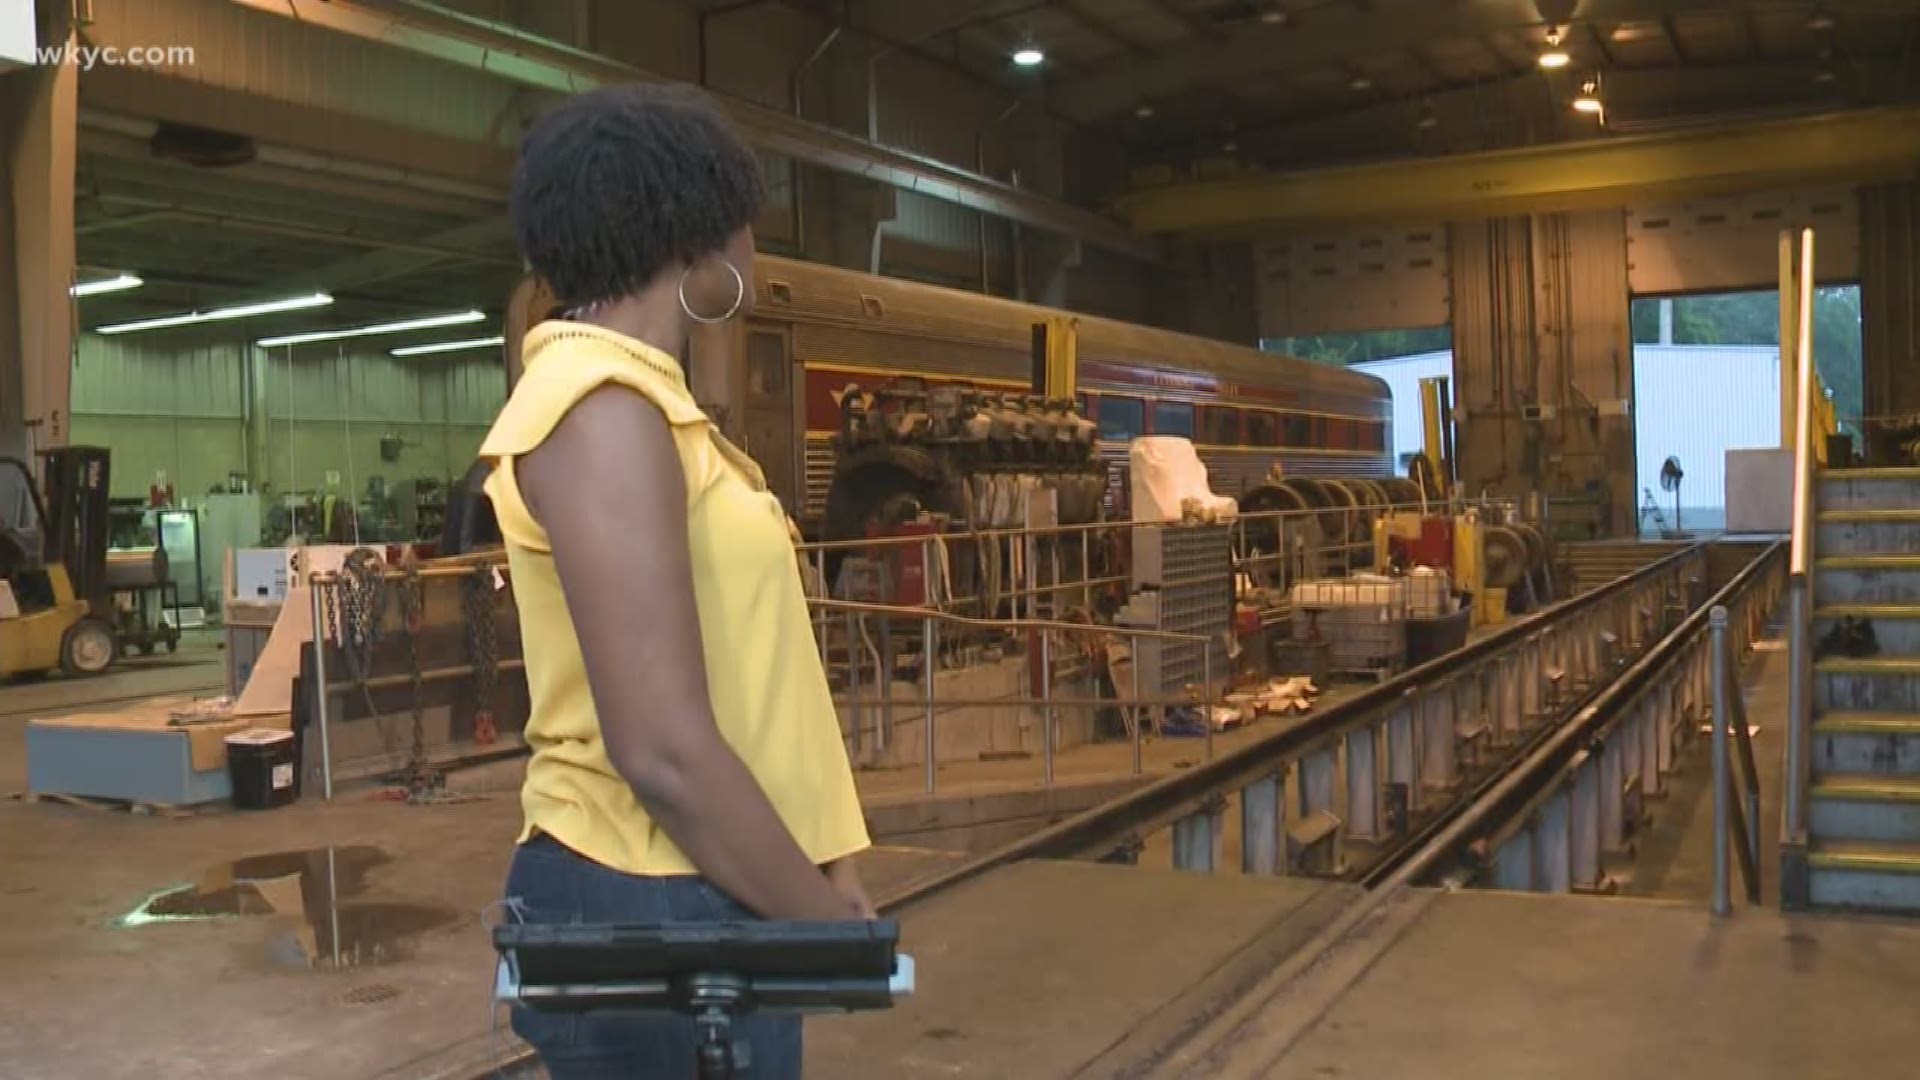 Aug. 6, 2018: The WKYC morning team was given an exclusive behind-the-scenes tour of the Cuyahoga Valley Scenic Railroad.